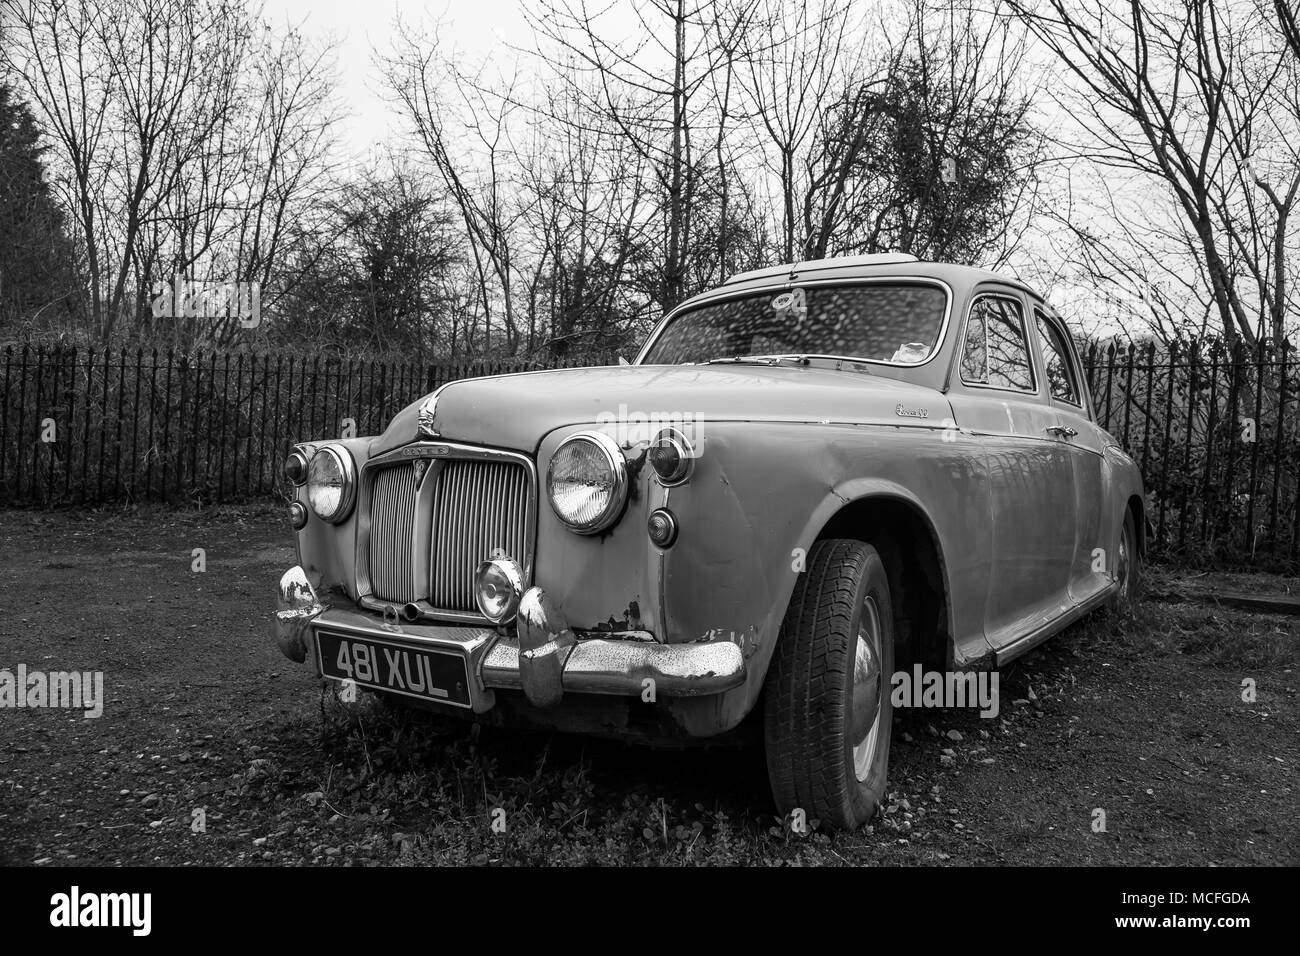 Monochrome, isolated Rover P90 motor car, abandoned relic, parked in a deserted UK car park. Stock Photo